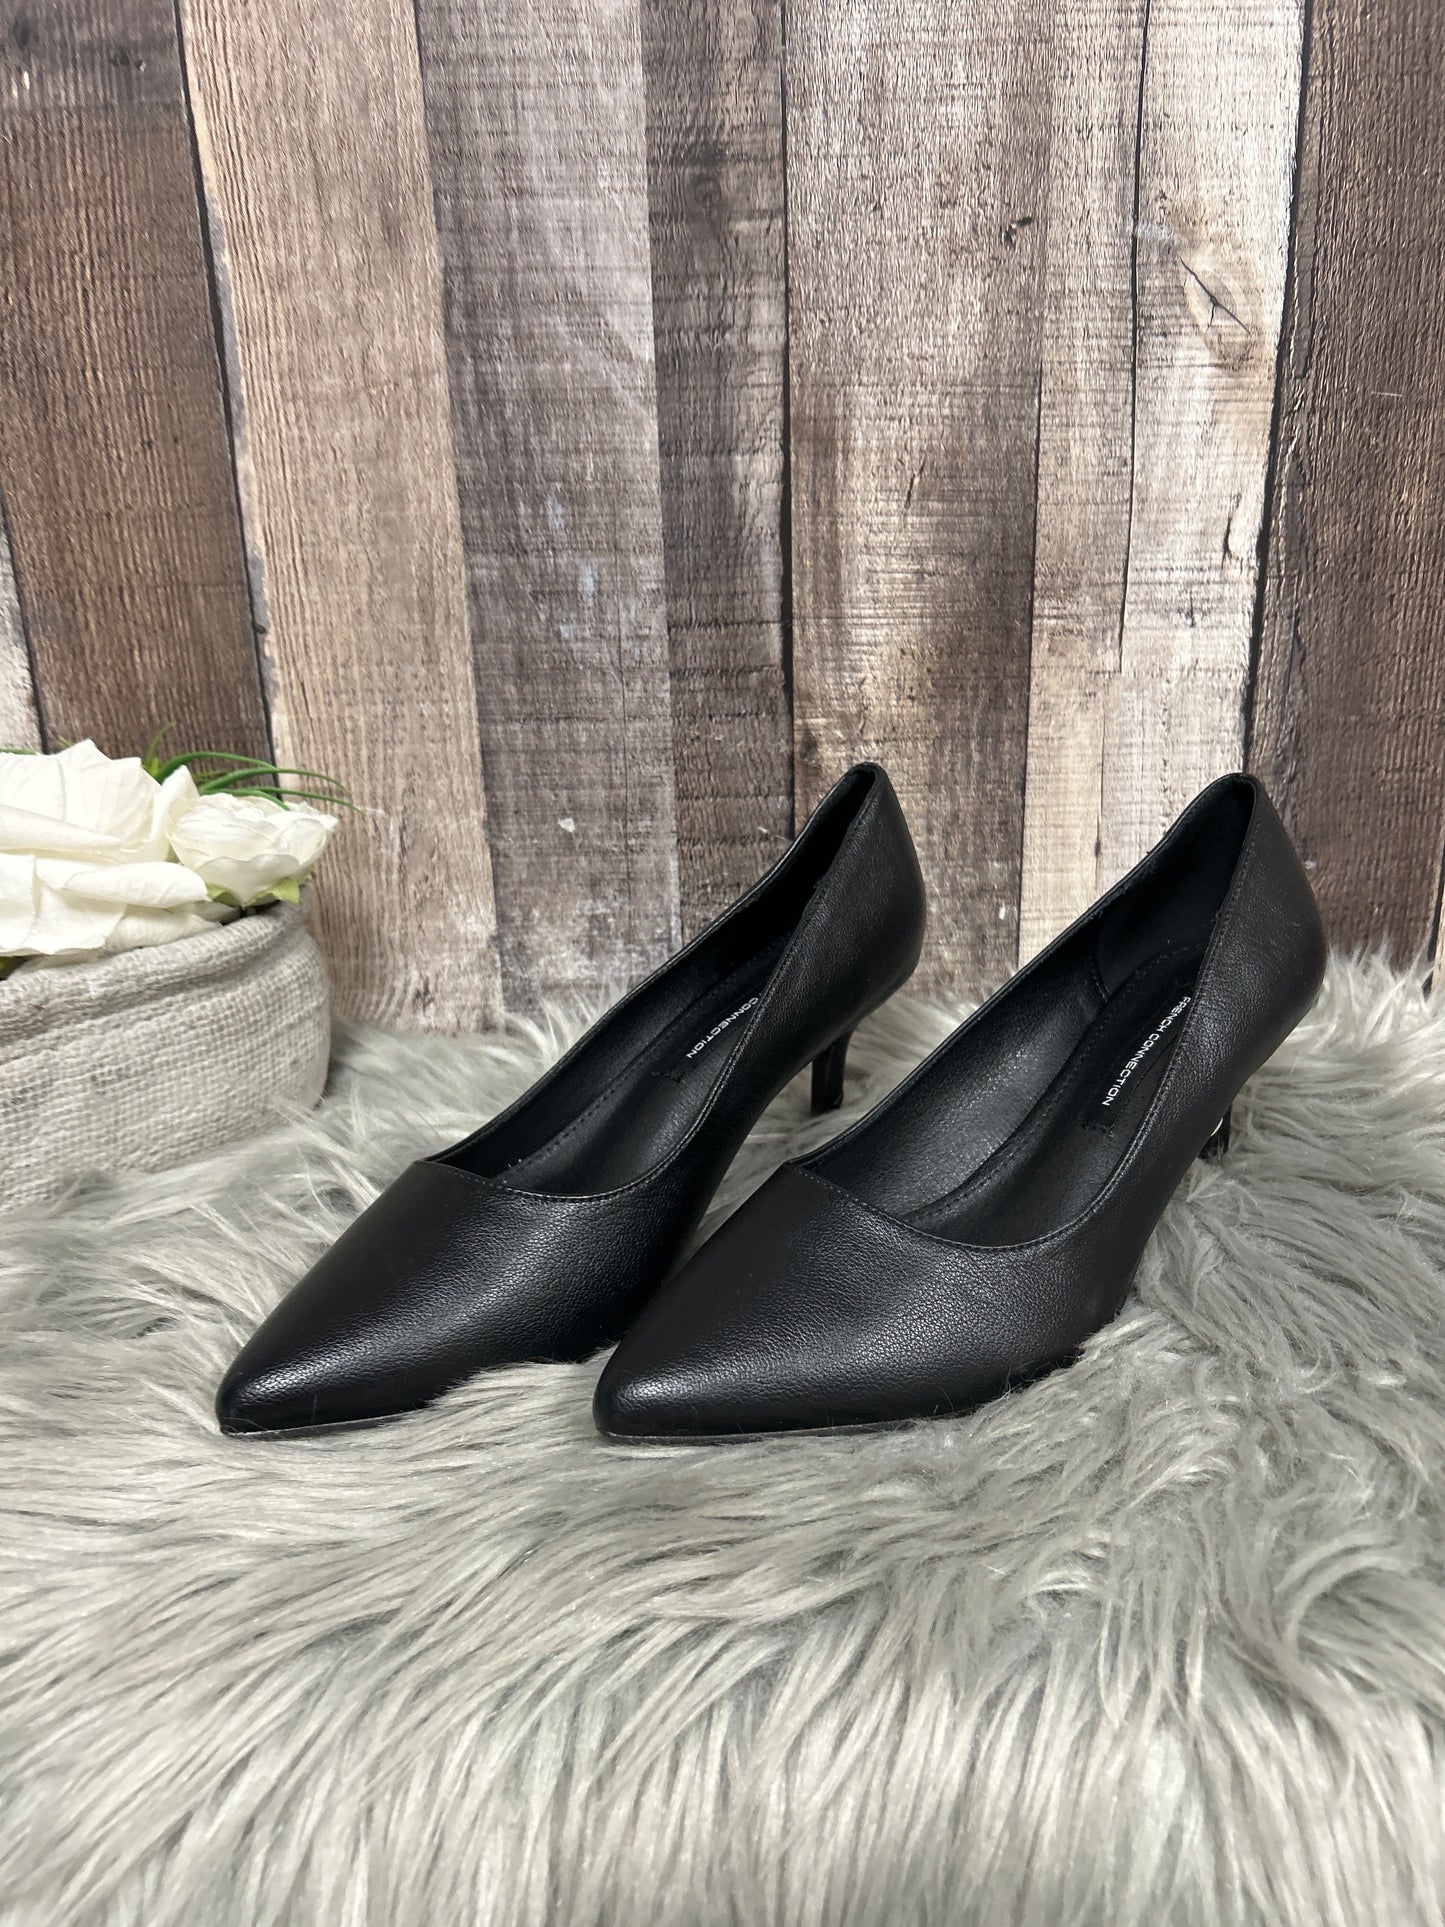 Black Shoes Heels Stiletto French Connection, Size 8.5